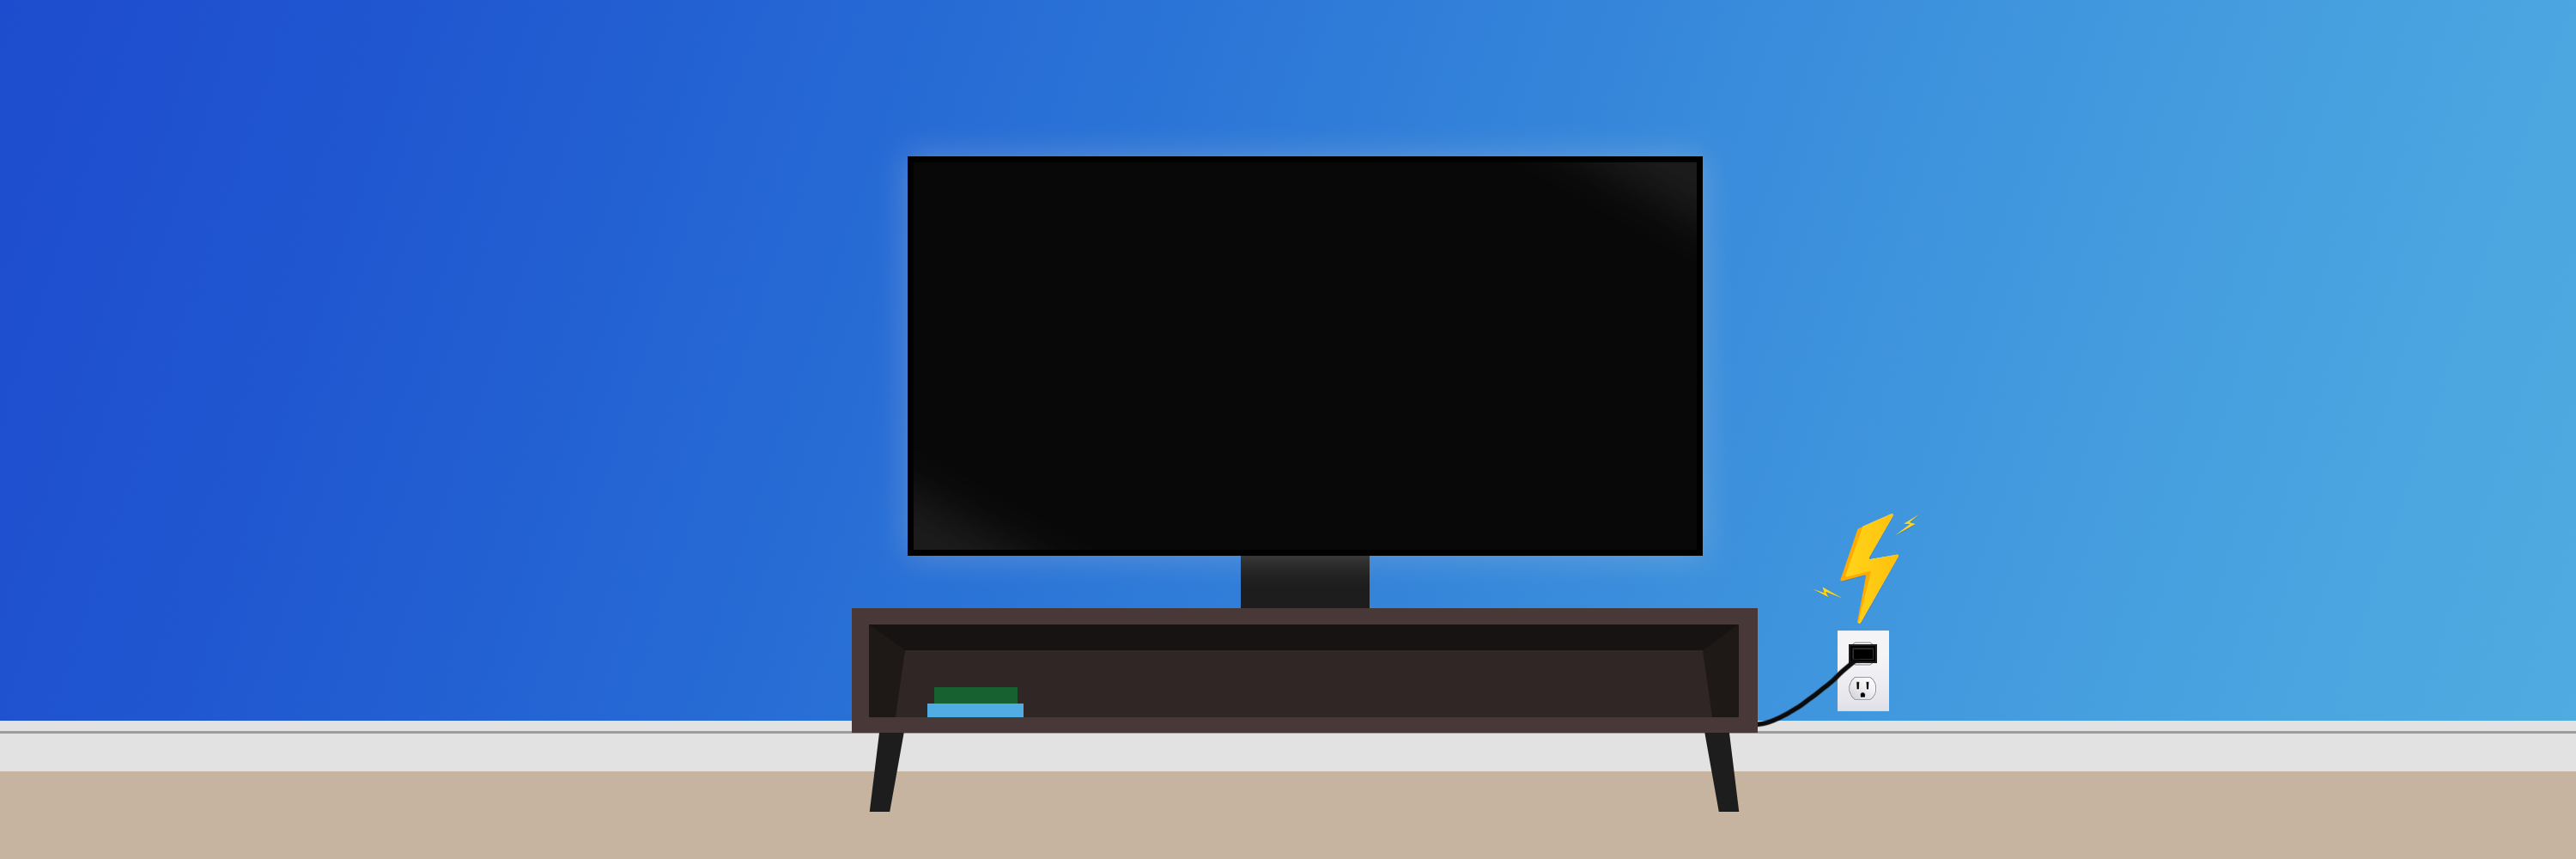 how much wattage does a tv use?